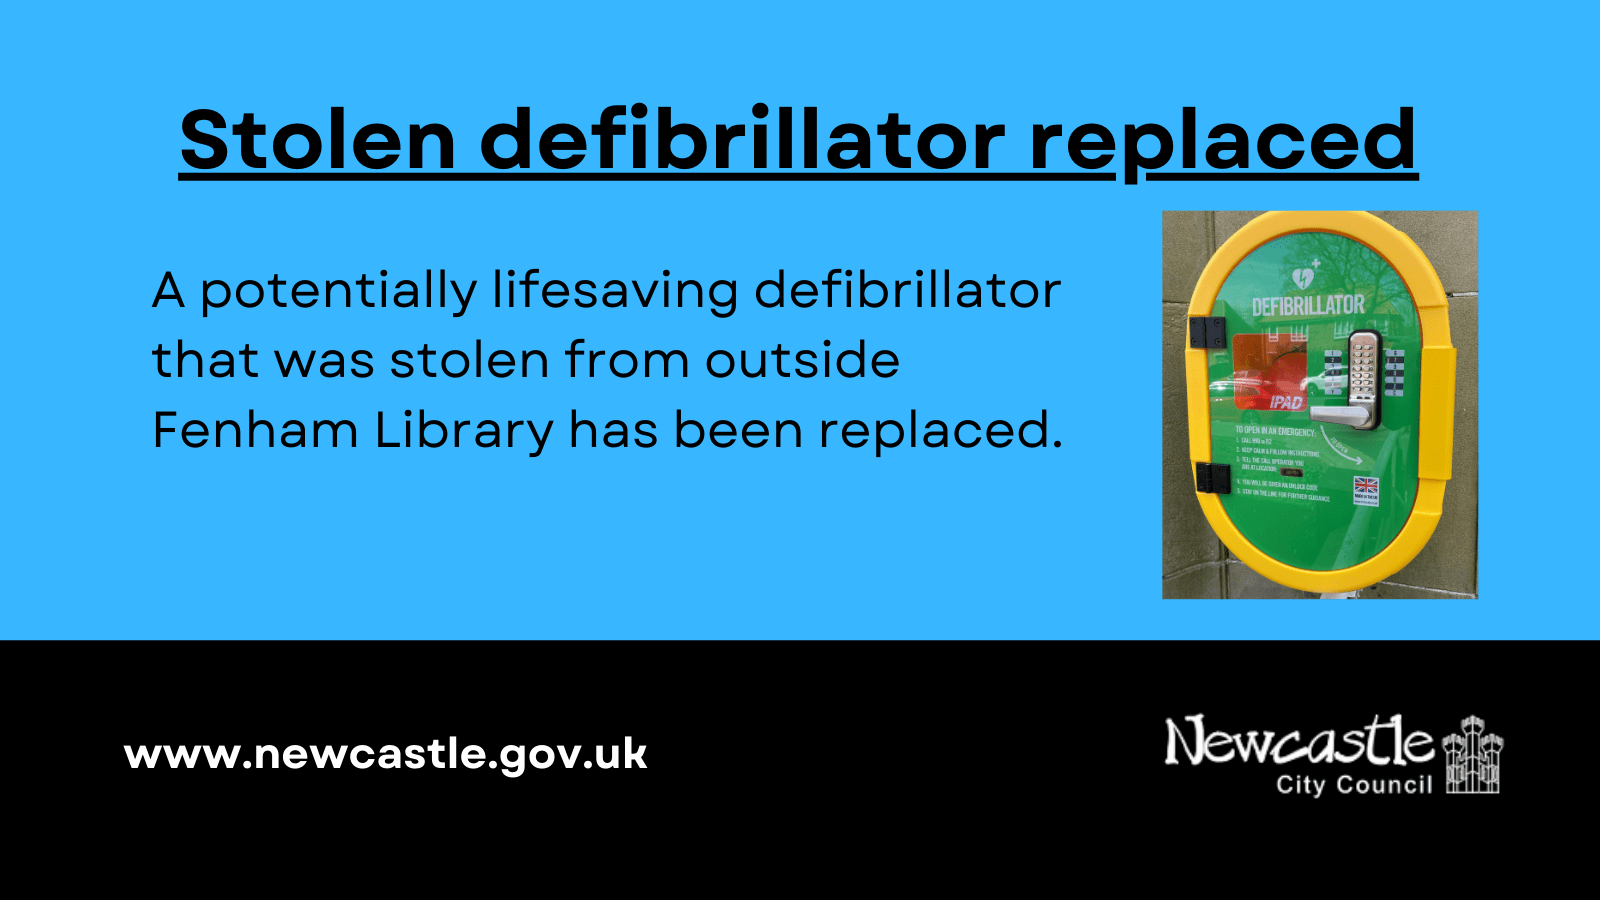 Defibrillator that was stolen from outside Fenham Library has been replaced